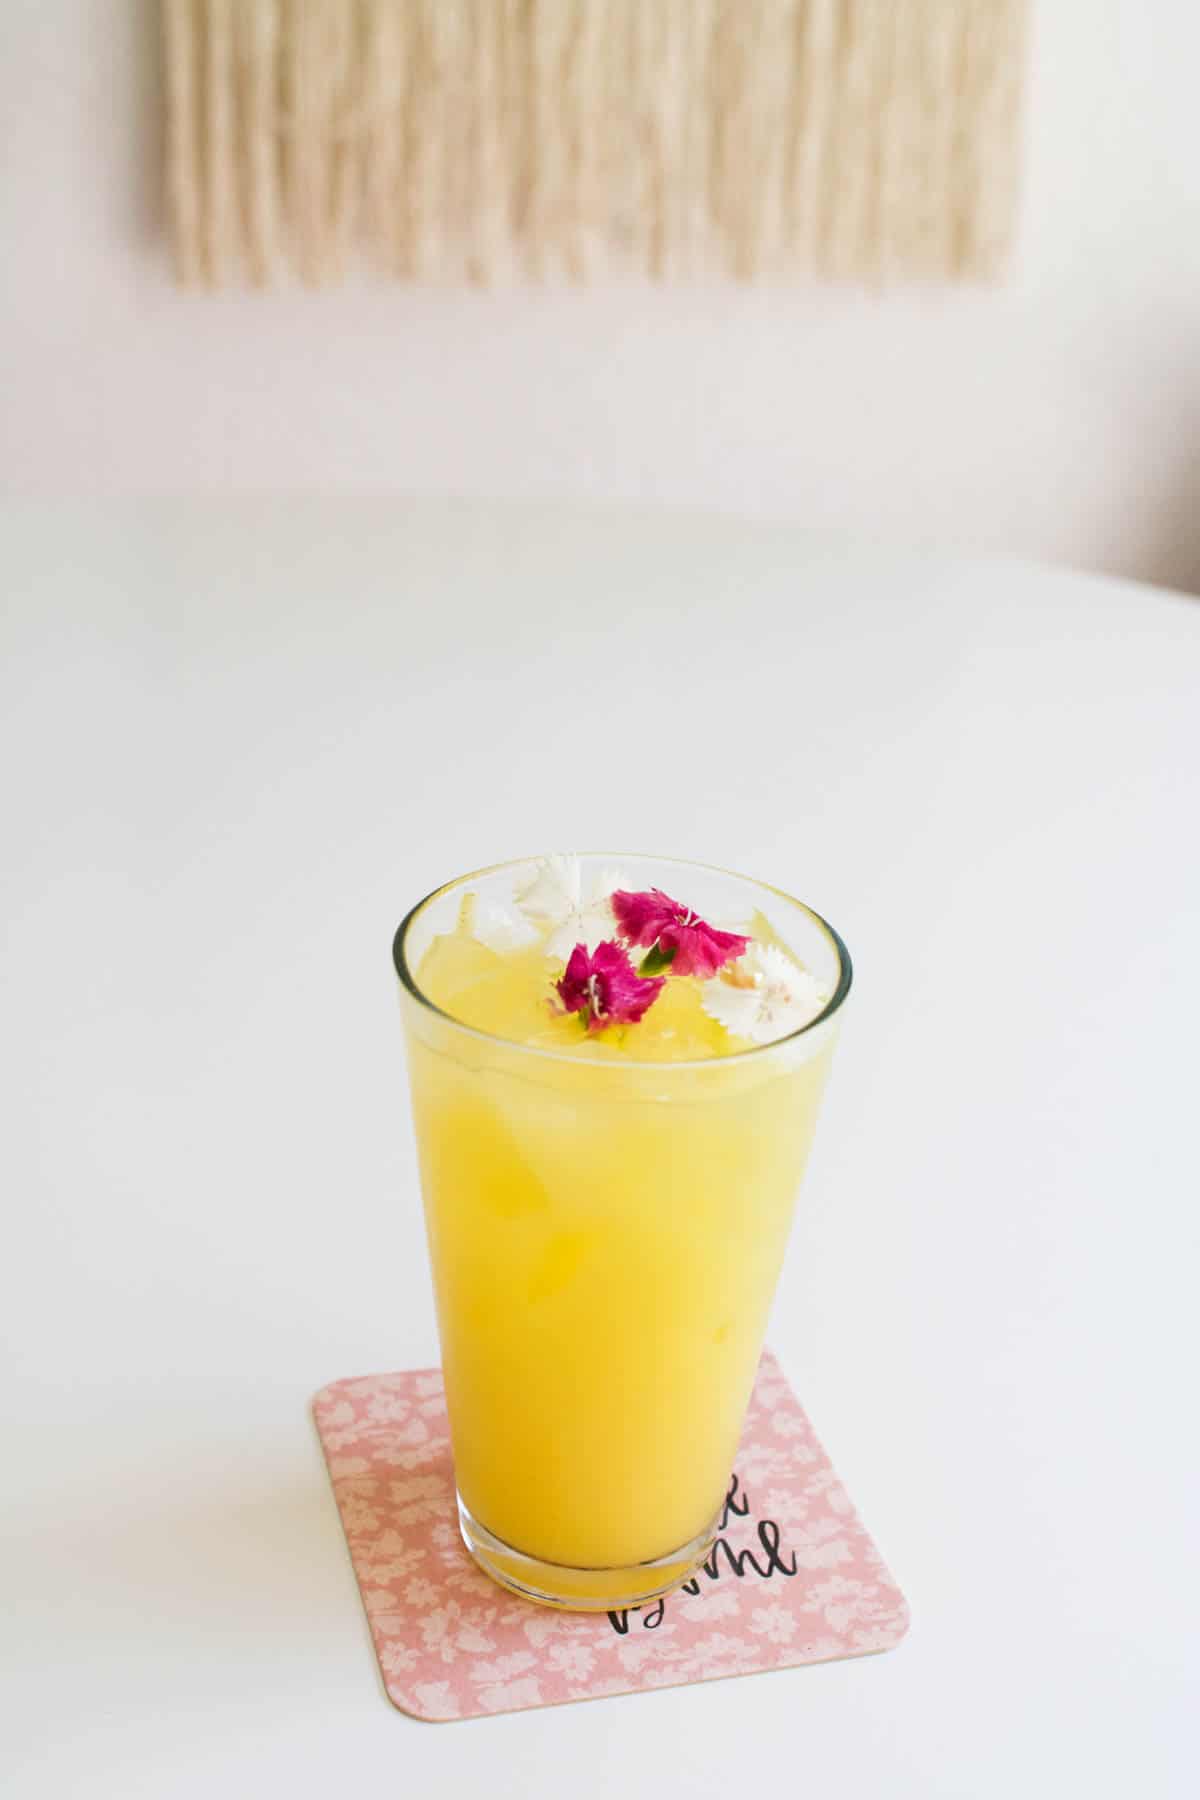 A tall glass with an orange juice cocktail on a table granished with pink flowers.